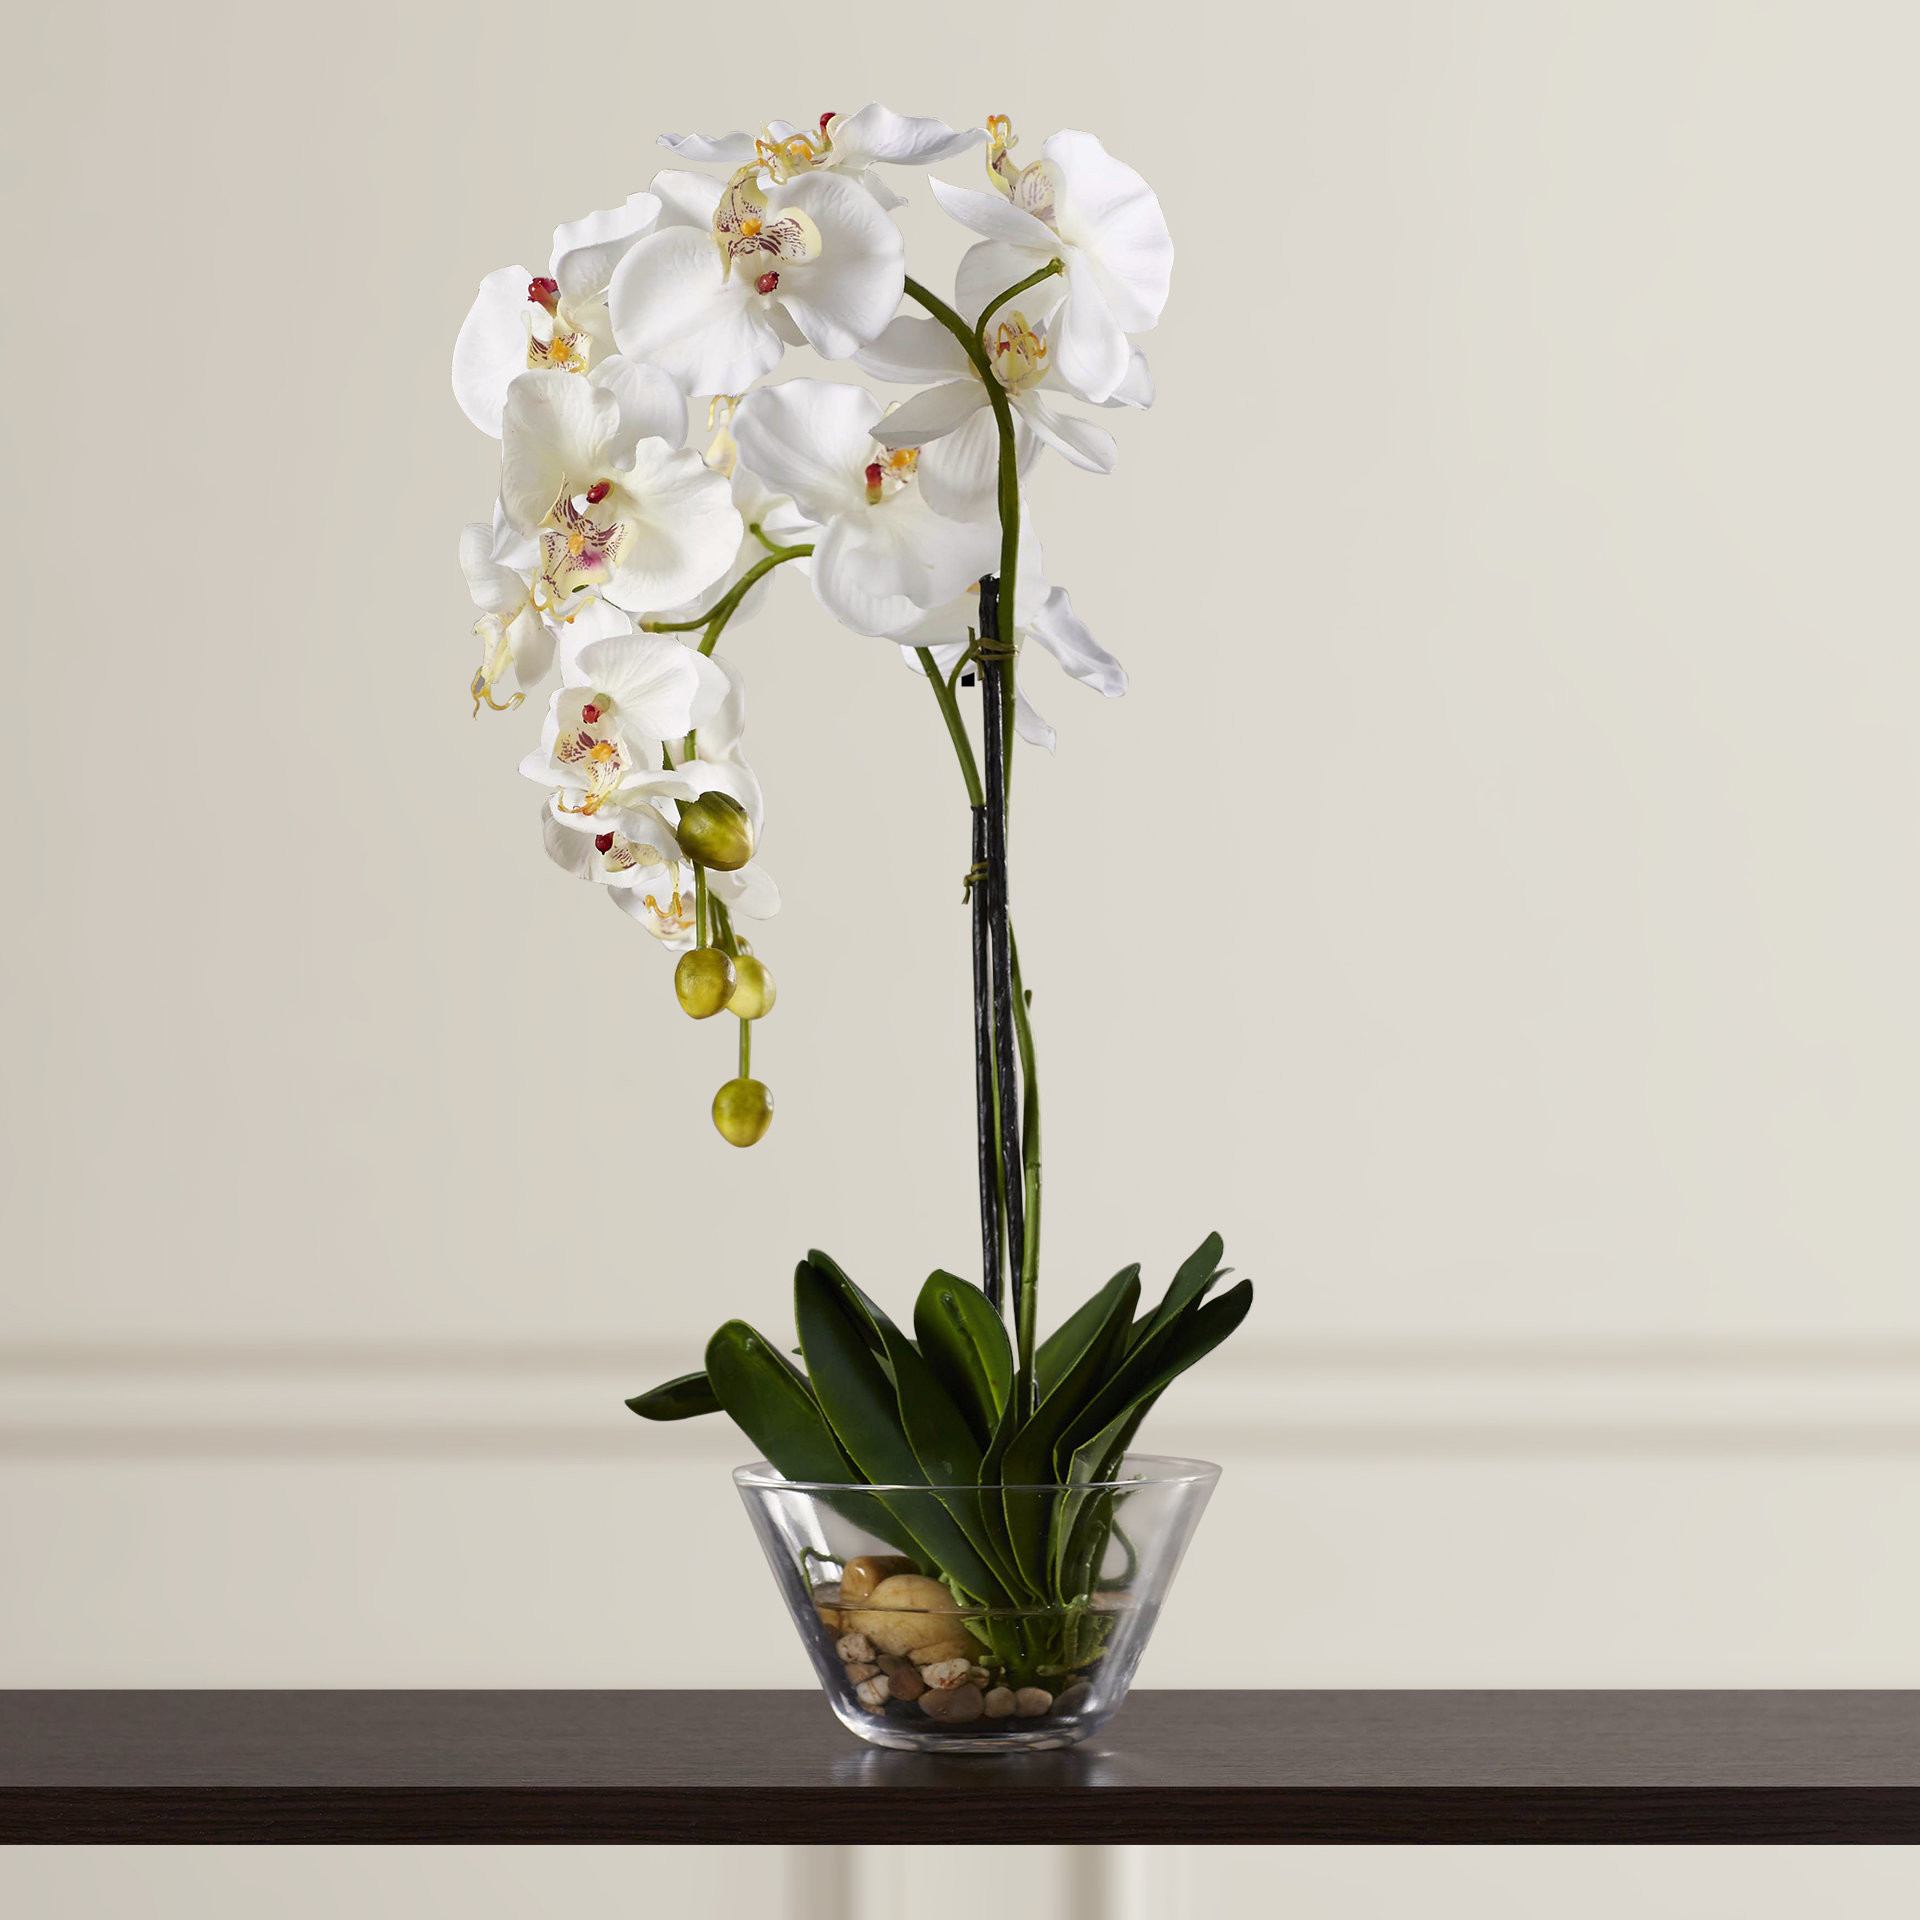 19 Fashionable 4 Inch Cube Vase 2022 free download 4 inch cube vase of three posts phalaenopsis silk white orchid in glass vase reviews for three posts phalaenopsis silk white orchid in glass vase reviews wayfair